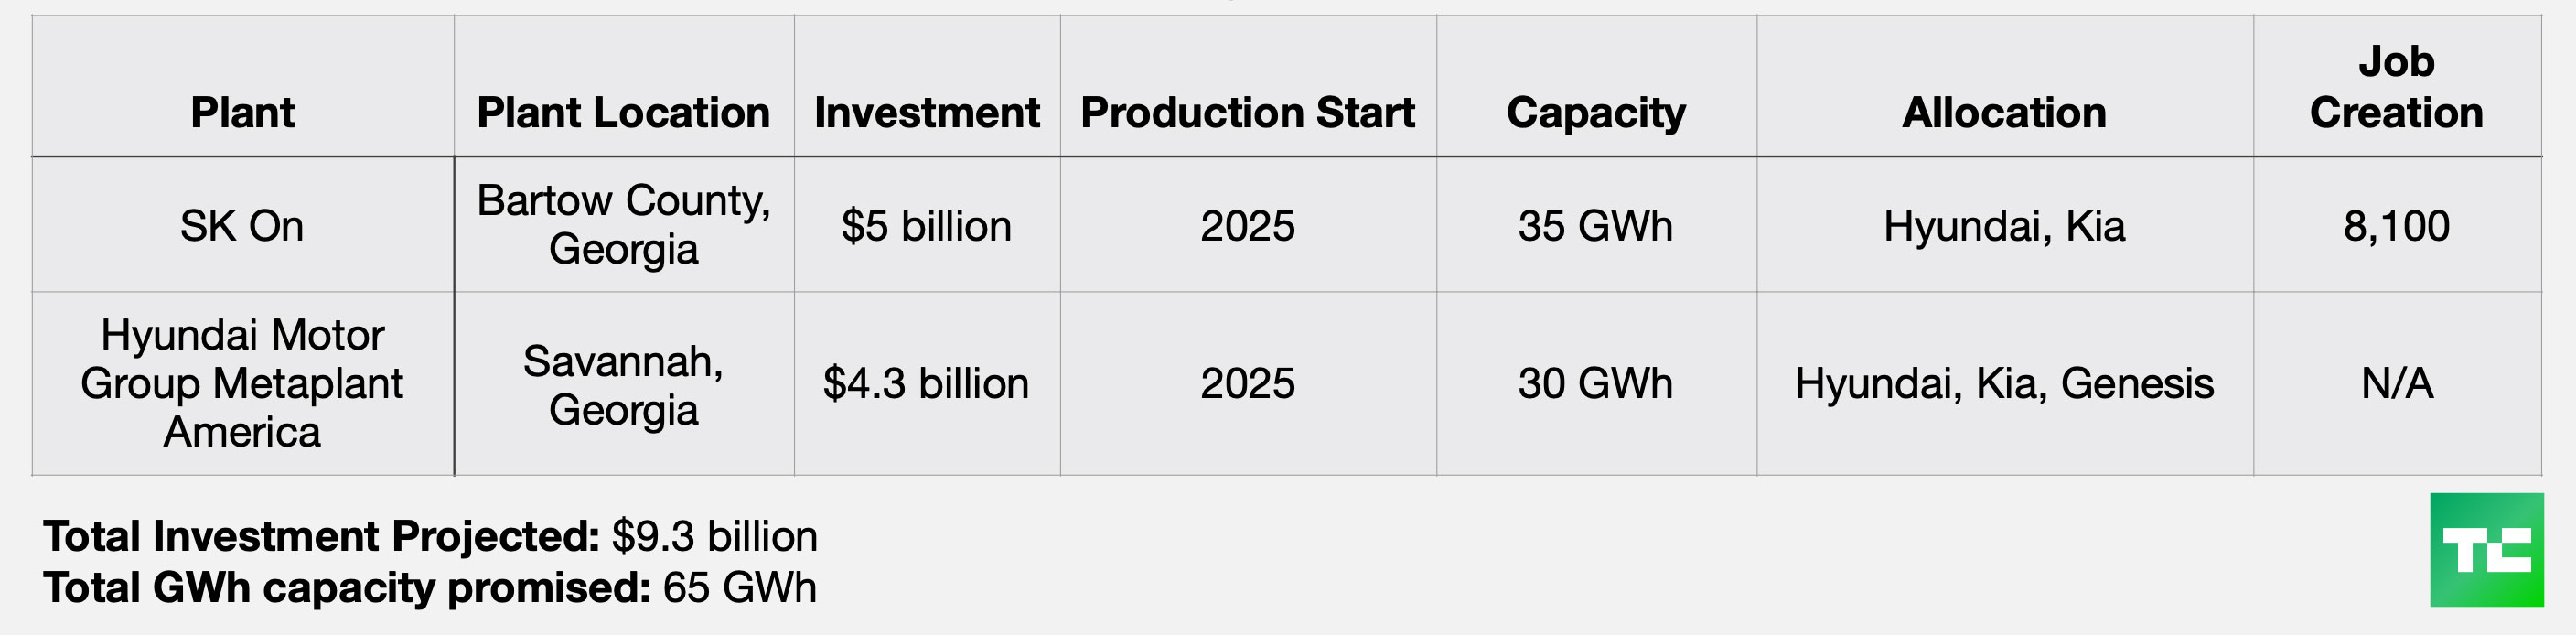 Hyundai's battery plant production plans broken down by plant name, plant location, investment, production start, capacity, allocation and the number of jobs it will create. Hyundai's total investment projected to be $9.3 billion. Total GWh capacity promised is 65 GWh. 